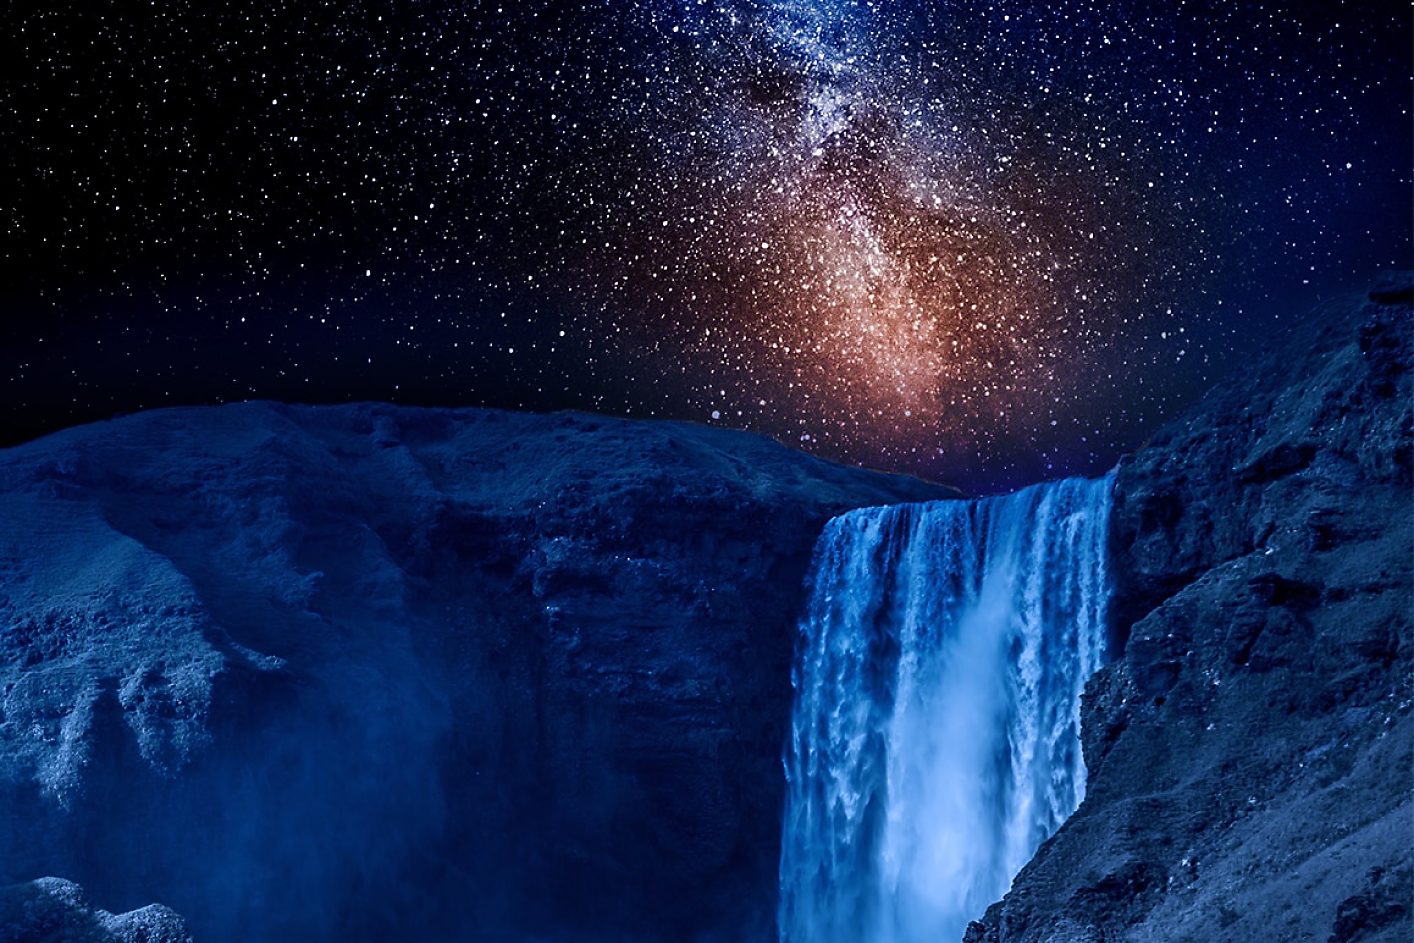 Dramatic image of the night sky above a waterfall